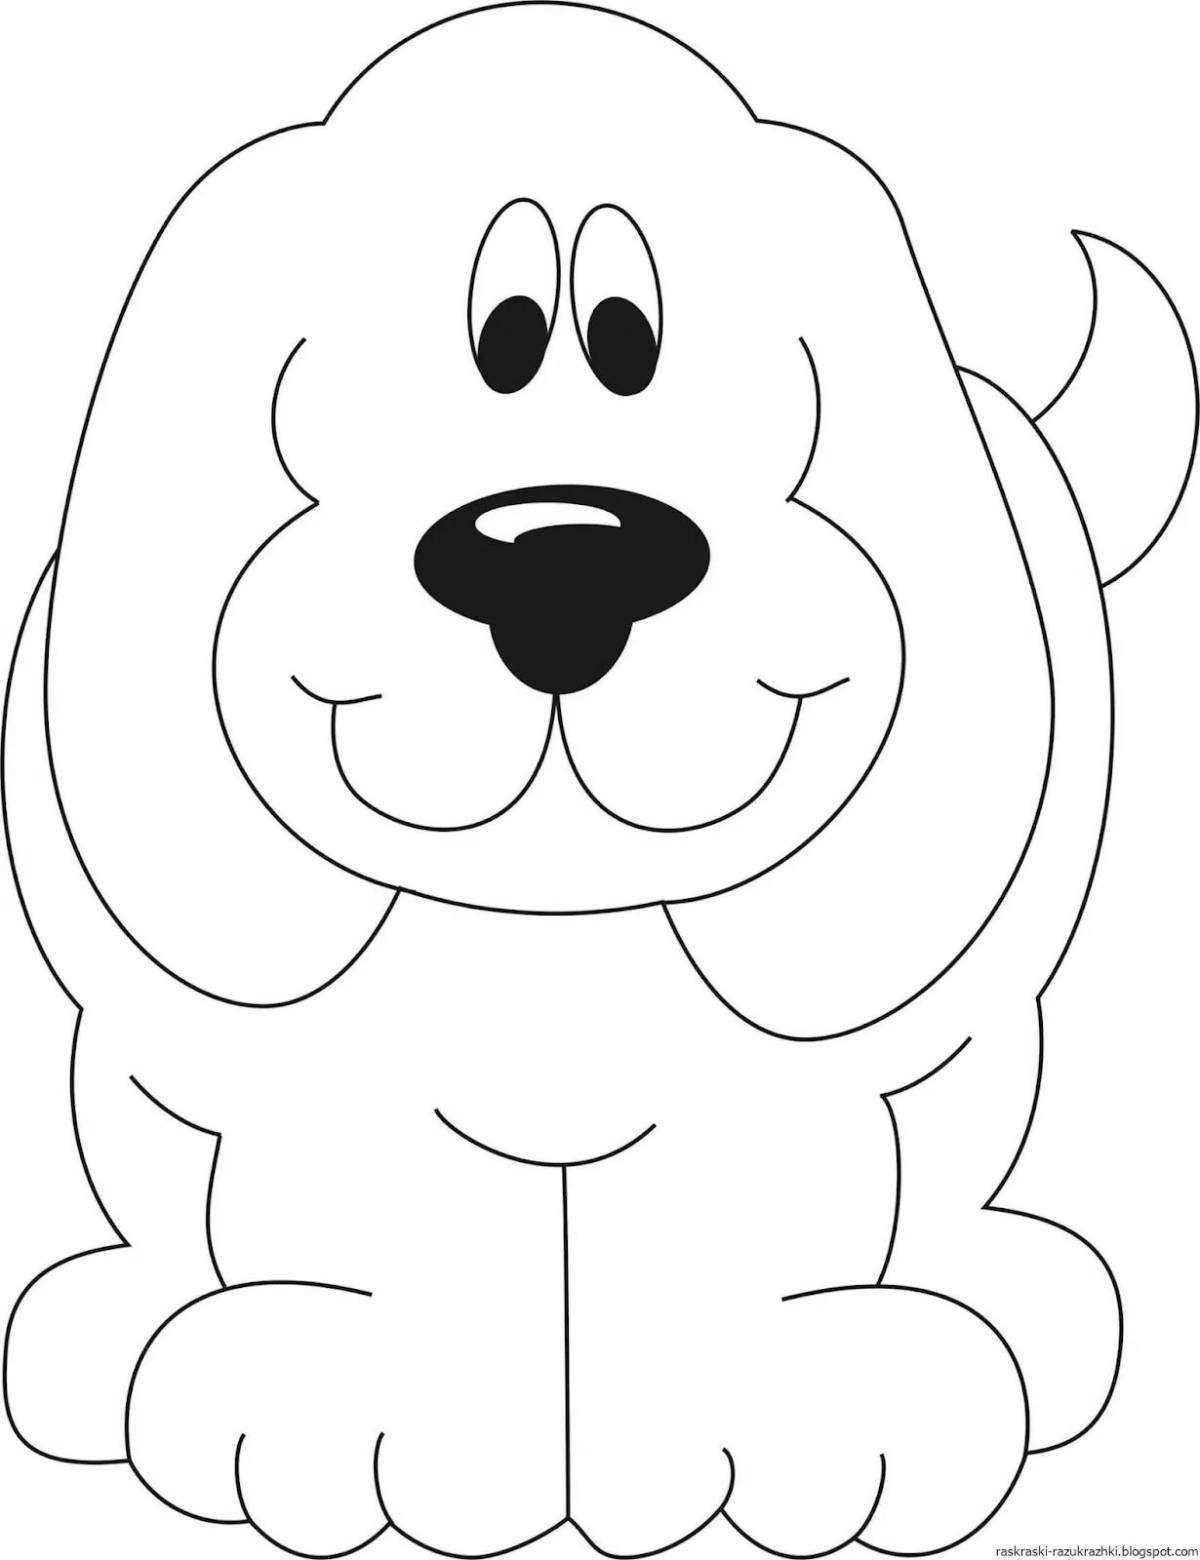 Fun coloring dog for children 2-3 years old